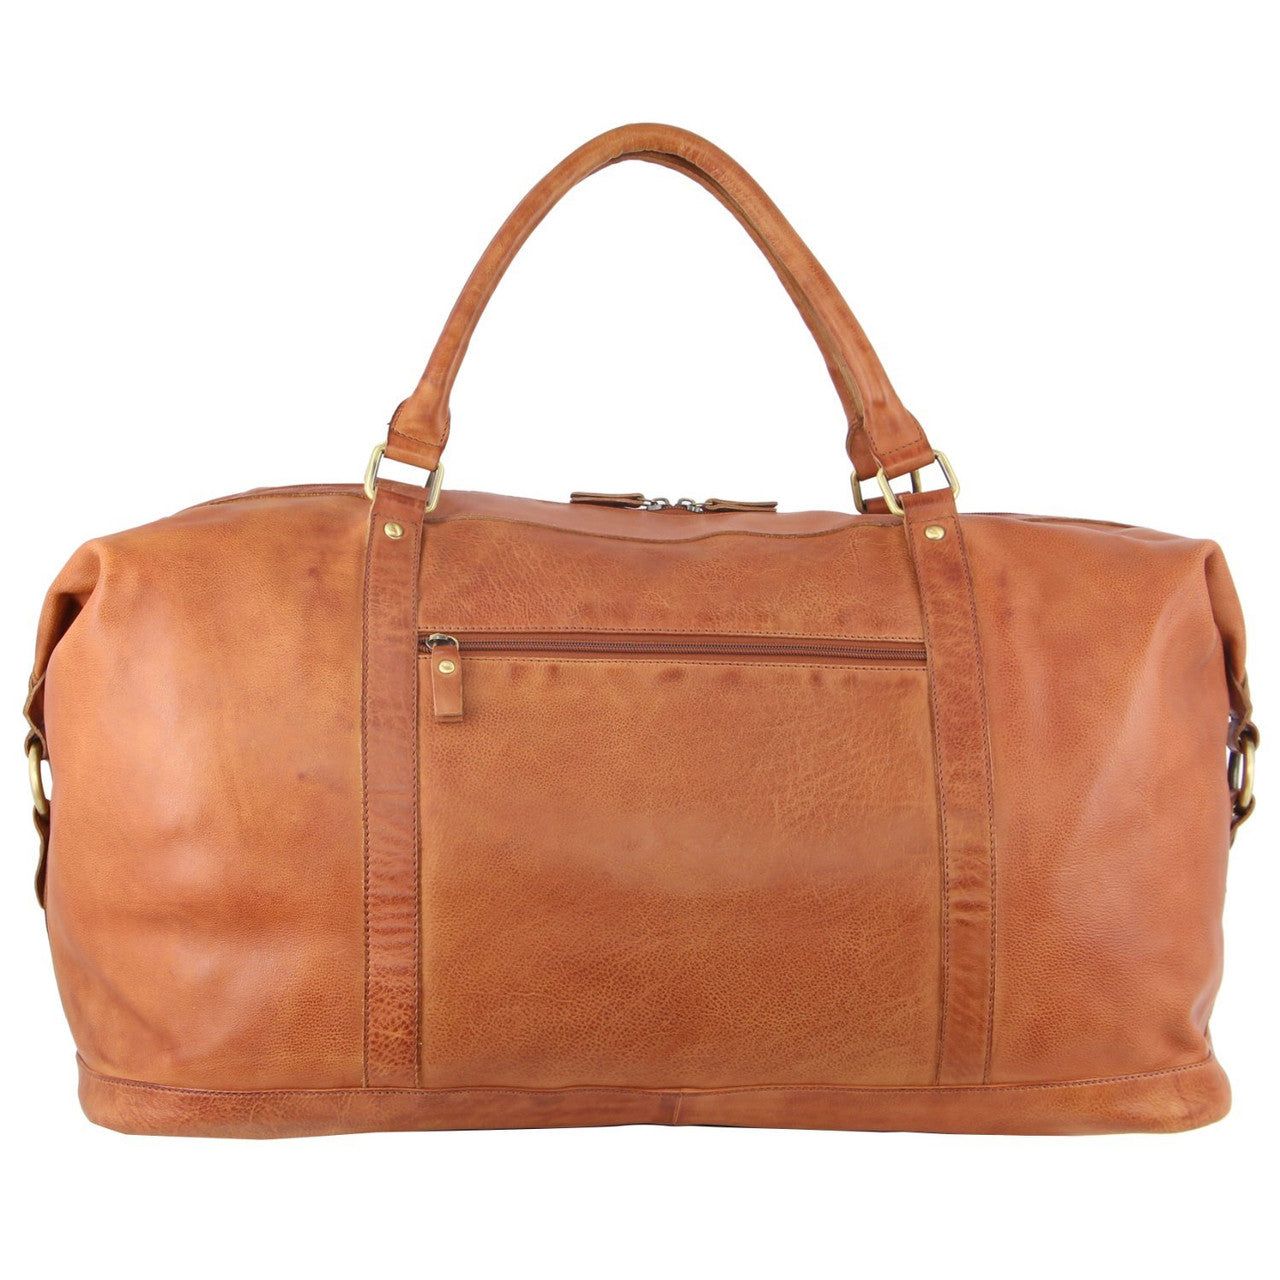 Pierre Cardin - Rustic Leather Overnight Bag with front flap pocket PC3134 - Cognac-3